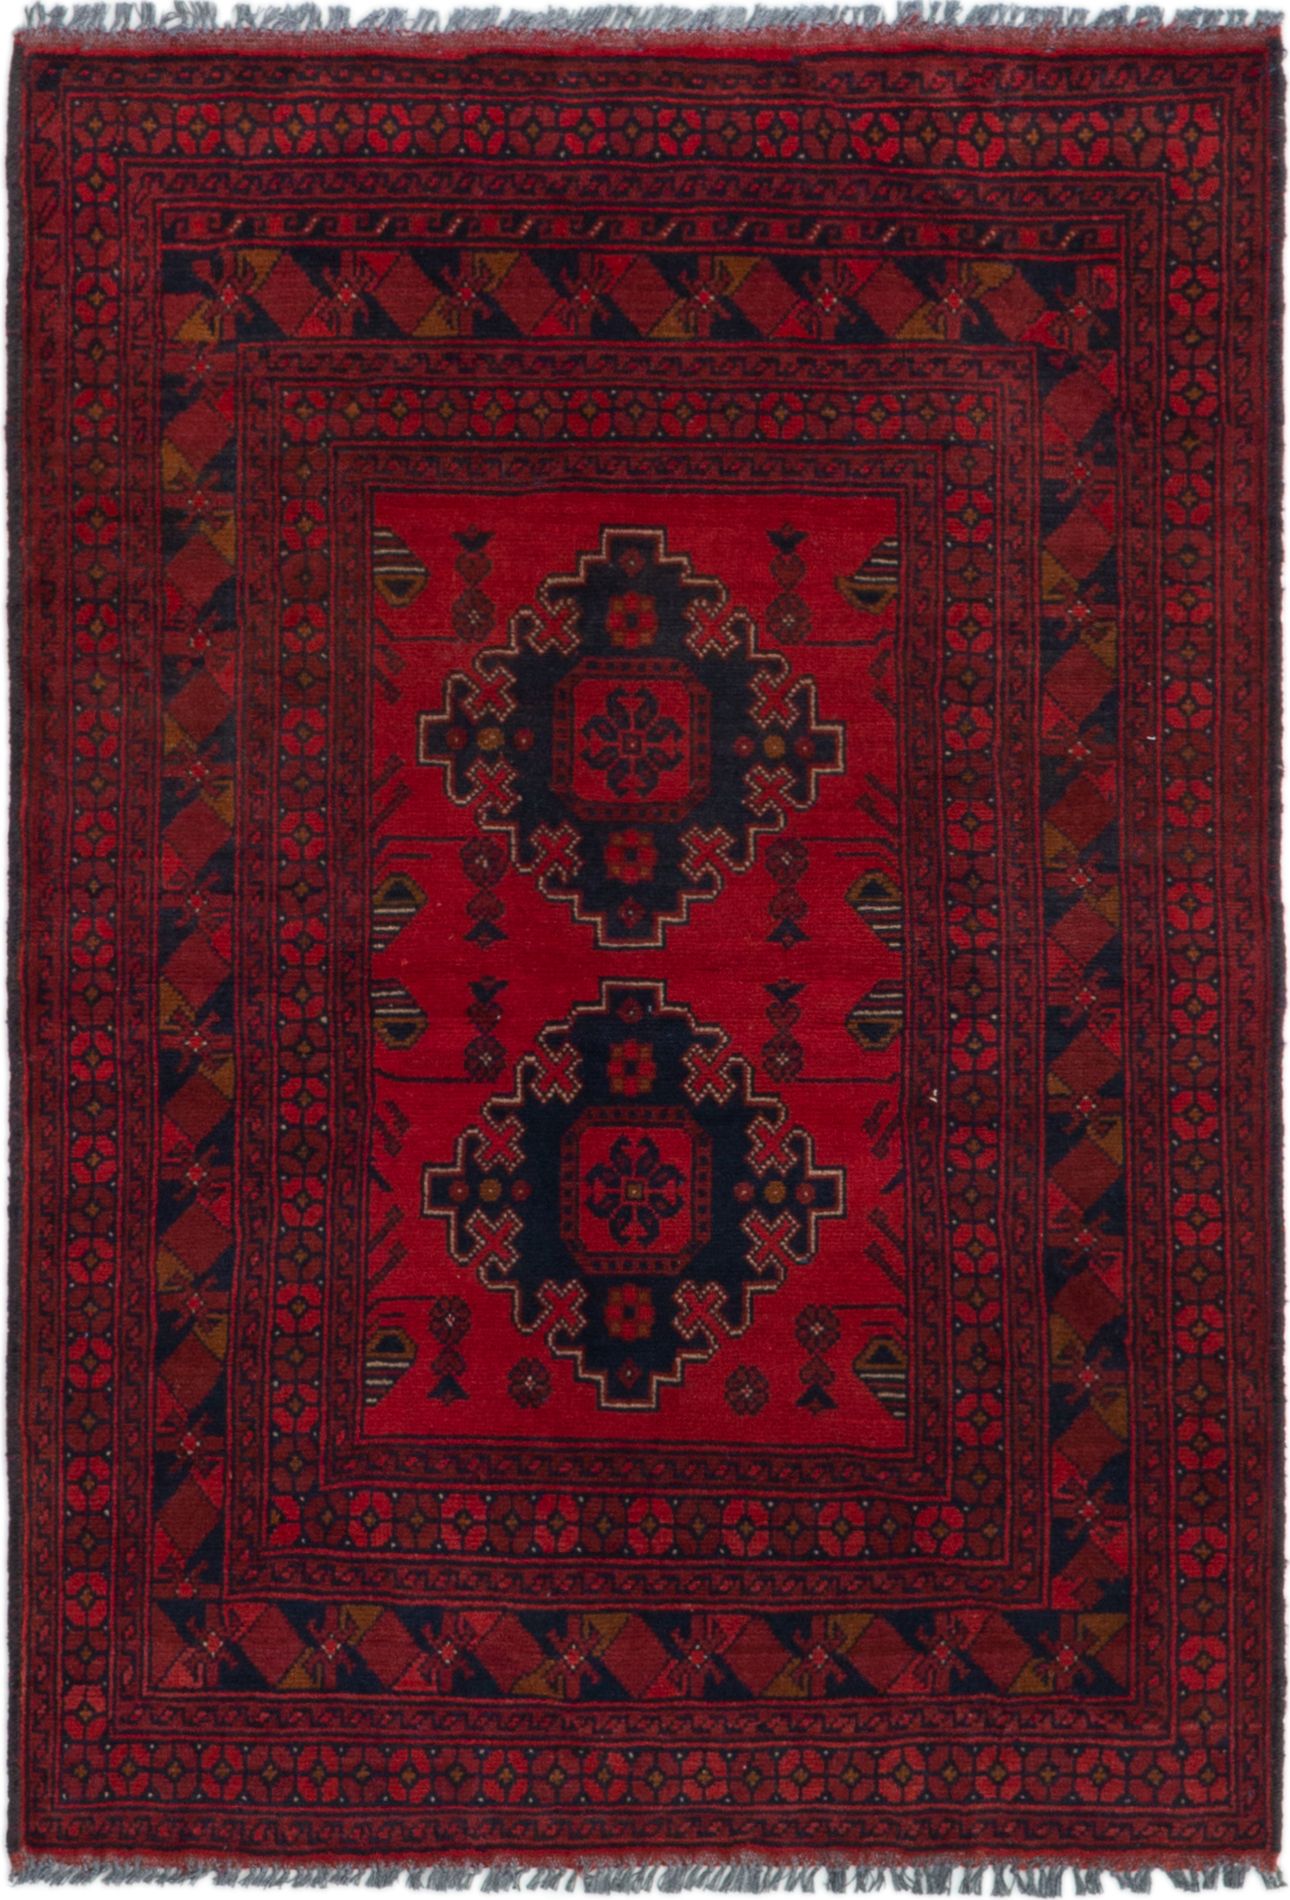 Hand-knotted Finest Khal Mohammadi Red Wool Rug 3'4" x 4'10" (35) Size: 3'4" x 4'10"  